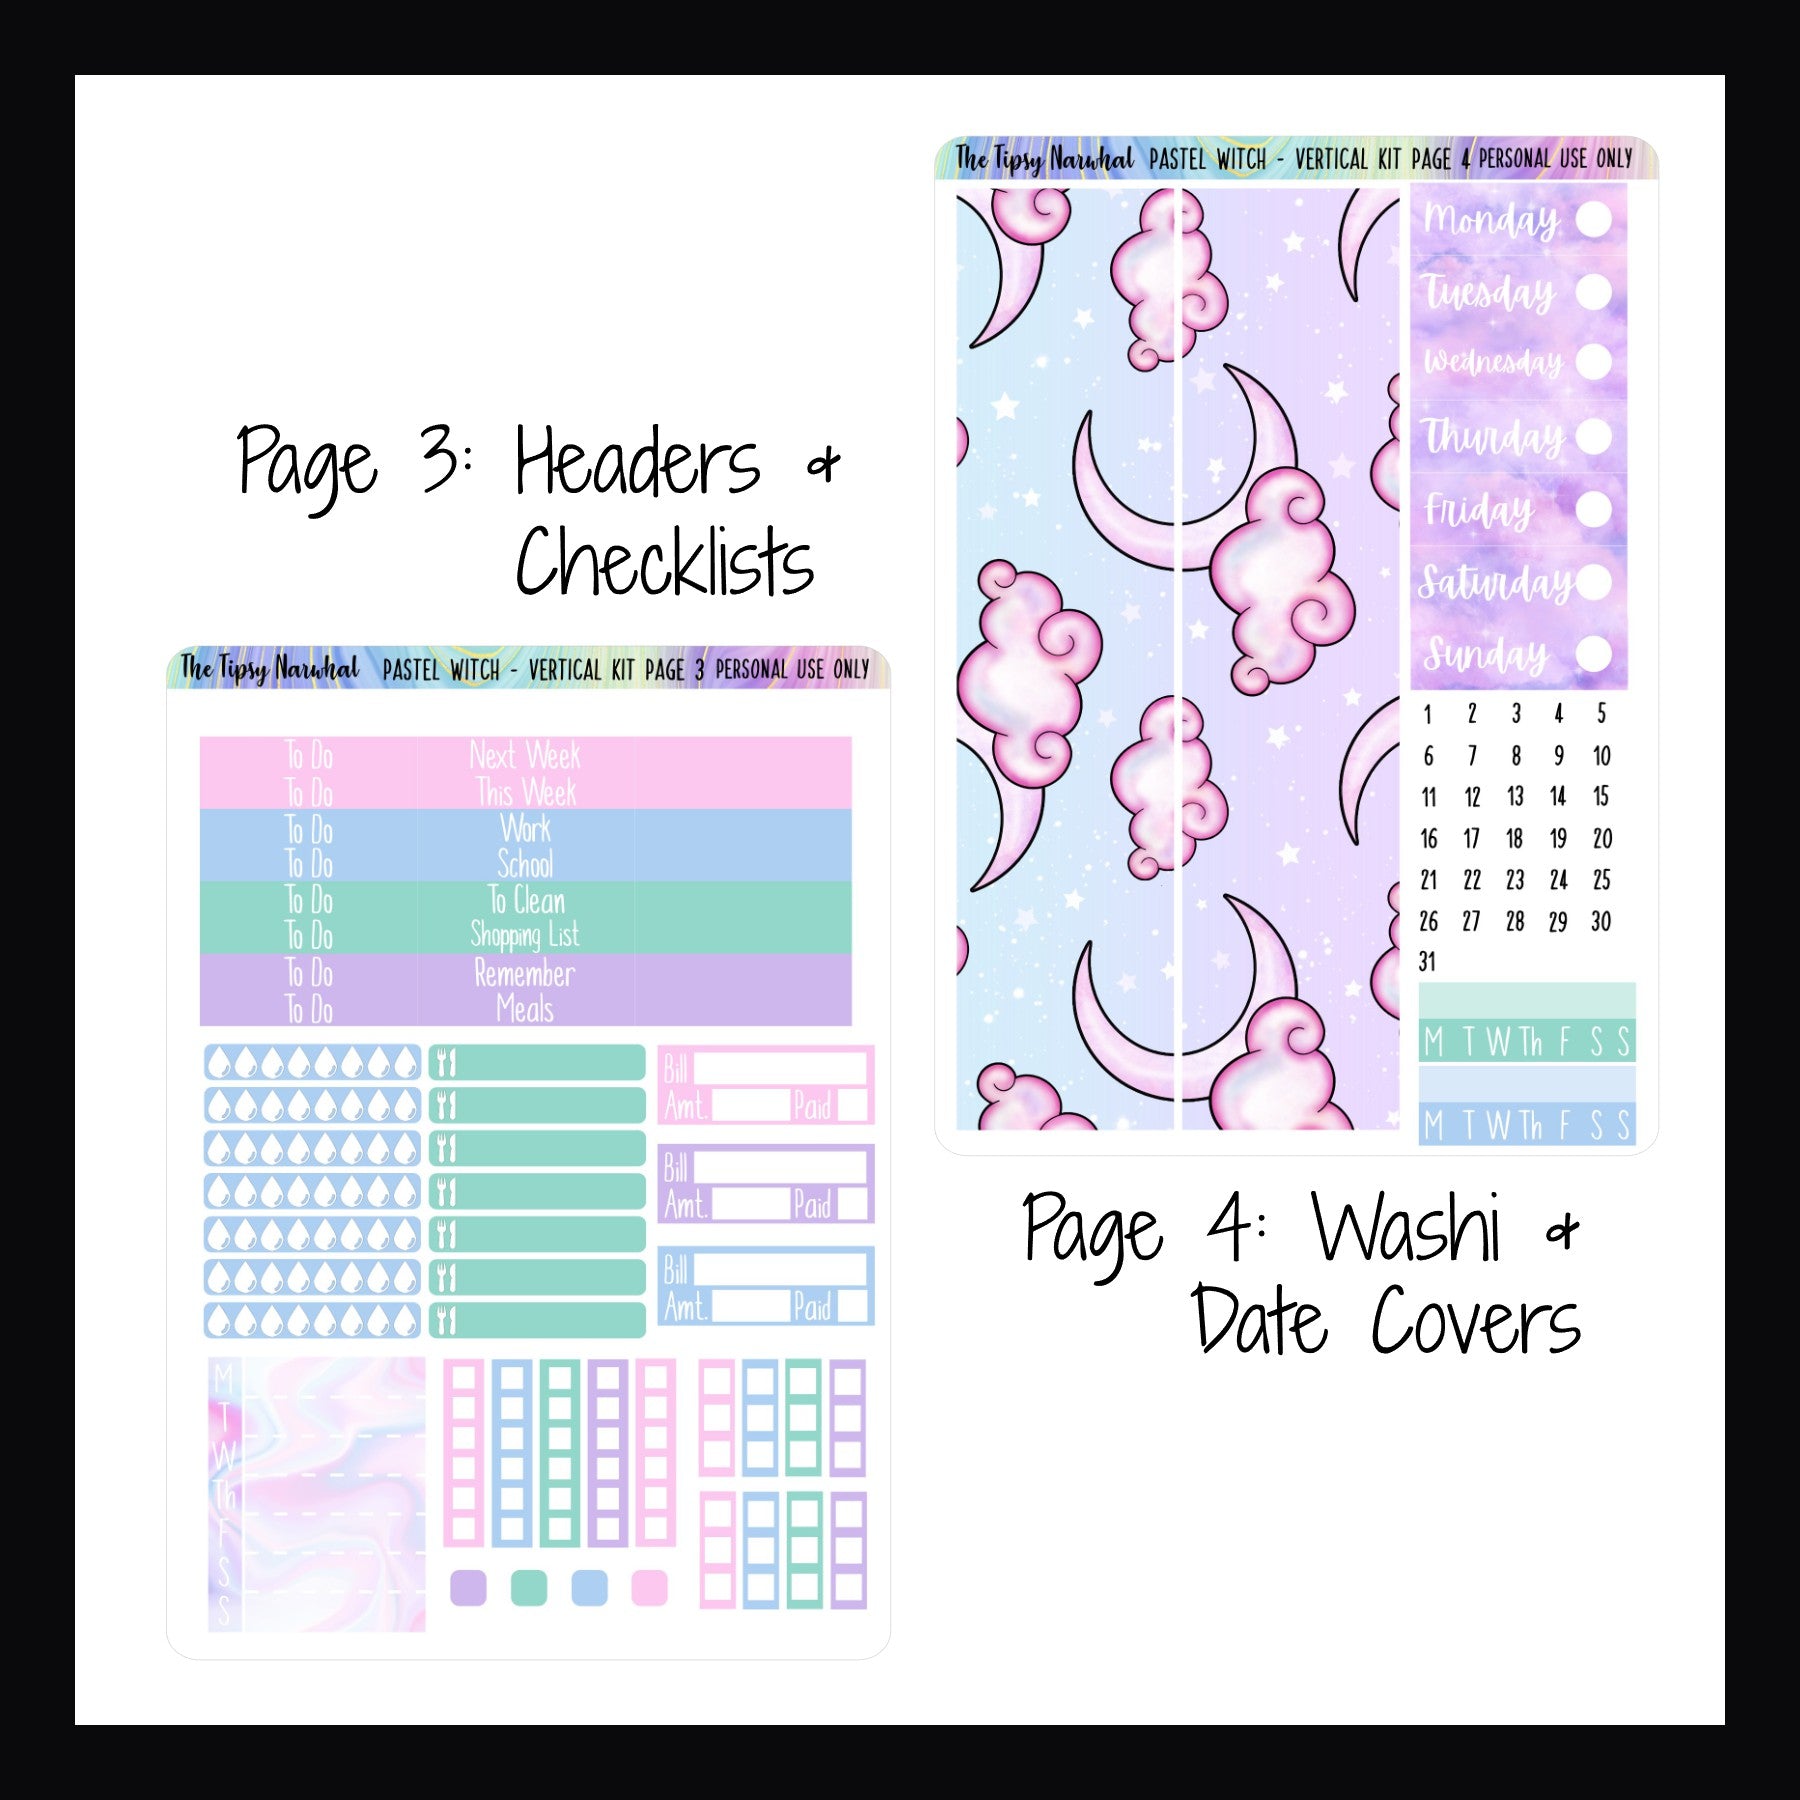 Digital Pastel Witch Vertical Kit pages 3 and 4.  Page 3 features header stickers, check list stickers, water tracking, meal tracking, bill tracking and a full week sticker.  Page 4 features full sized washi strips, date covers and habit trackers. 